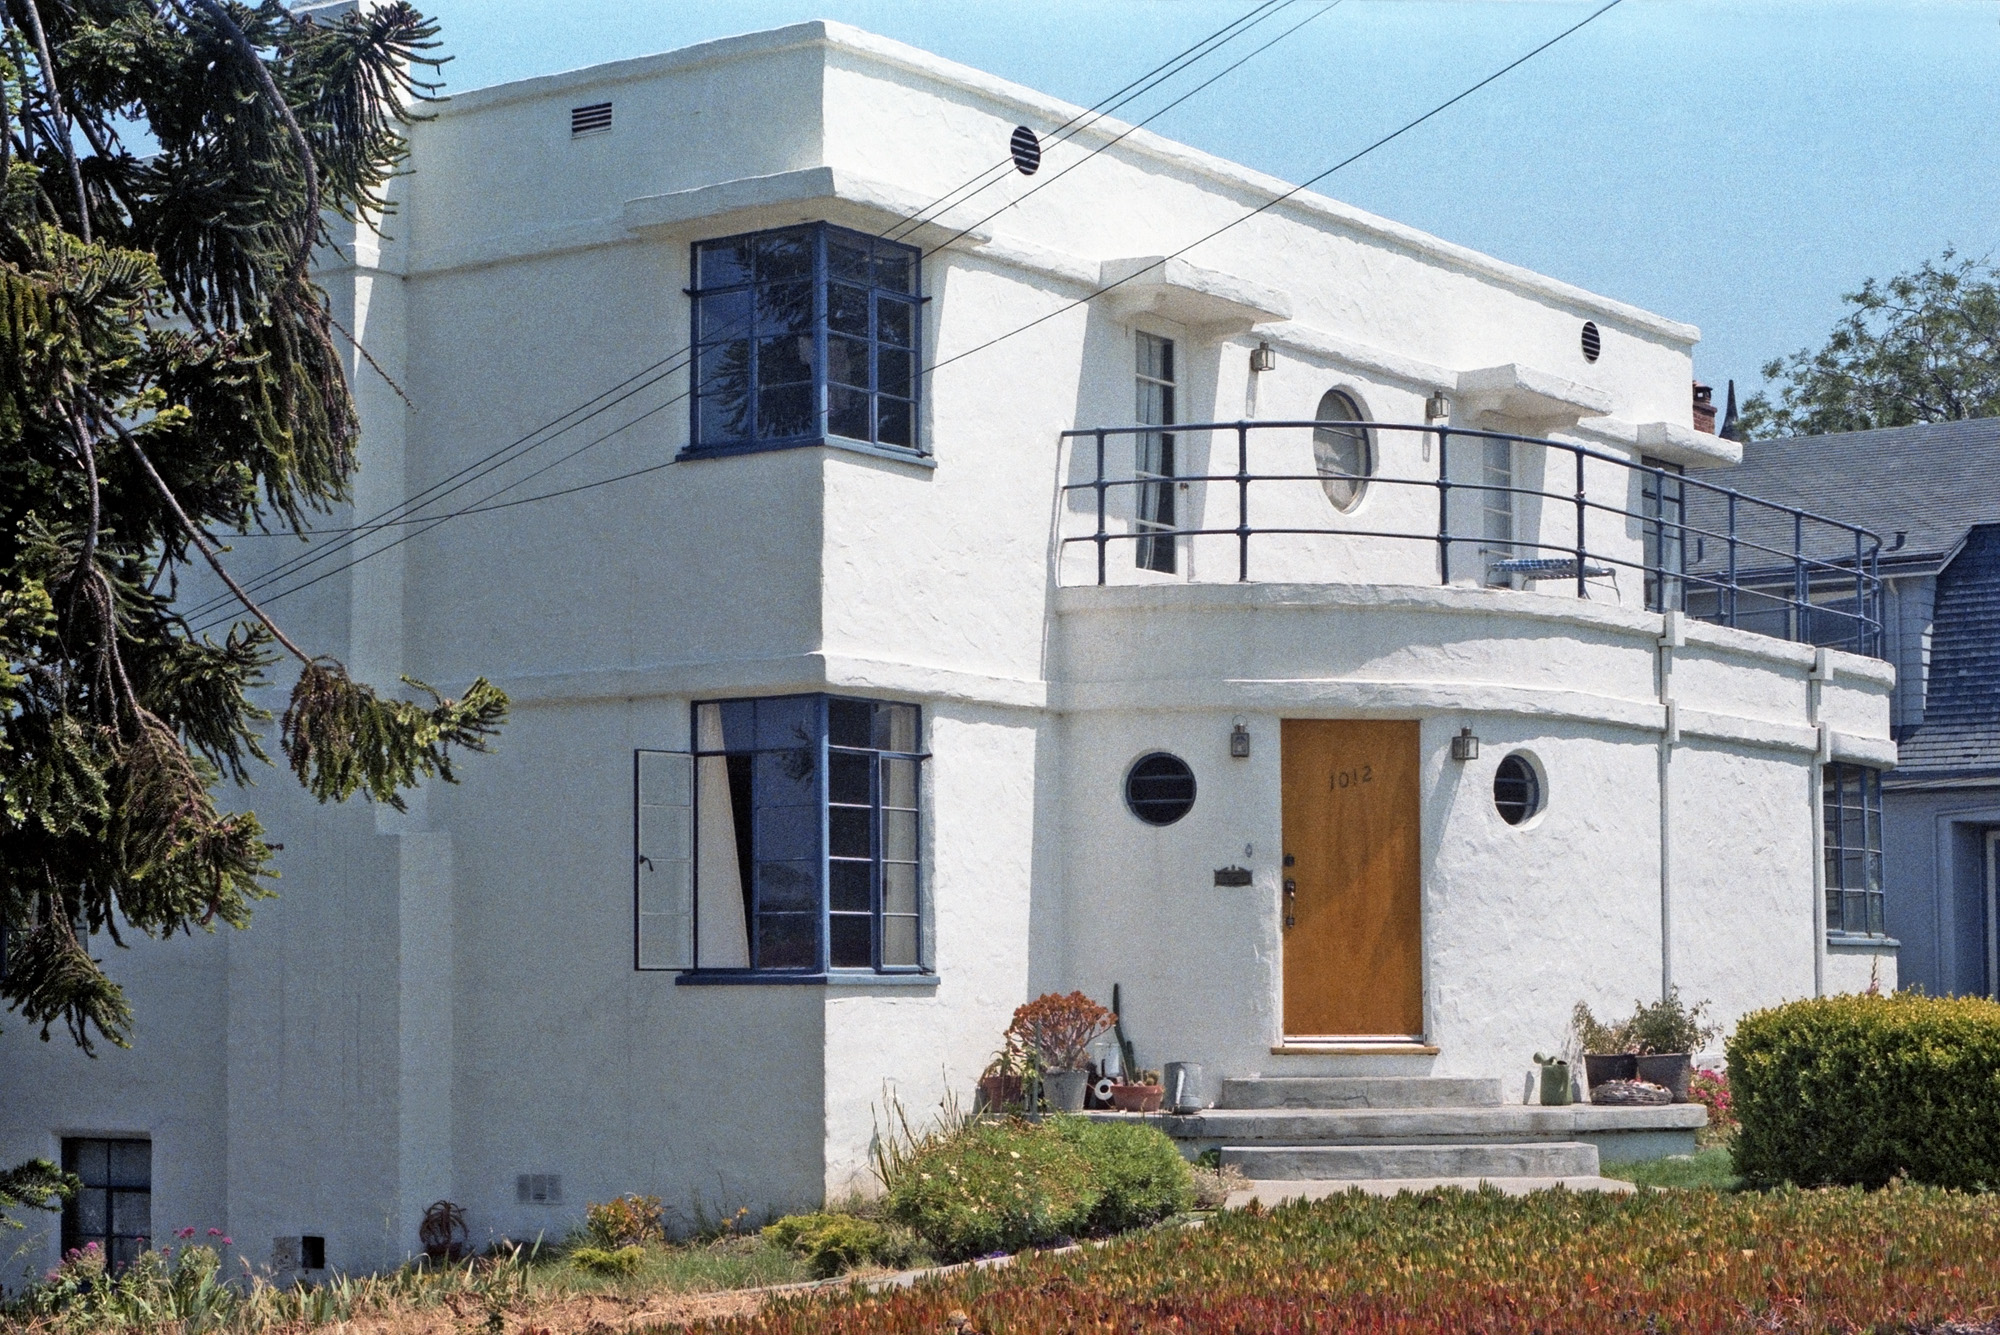 A classic example of 1930s Streamline Moderne architecture in a Santa Cruz, California house I photographed in 1984, showing a number of characteristic elements: porthole and corner windows, the rounded edge of the entryway, the flat roof and white stucco surfaces. Unfortunately, the current Google street view shows it's acquired a color scheme not in keeping with the spirit of the style. A 35mm Kodacolor negative. View full size.